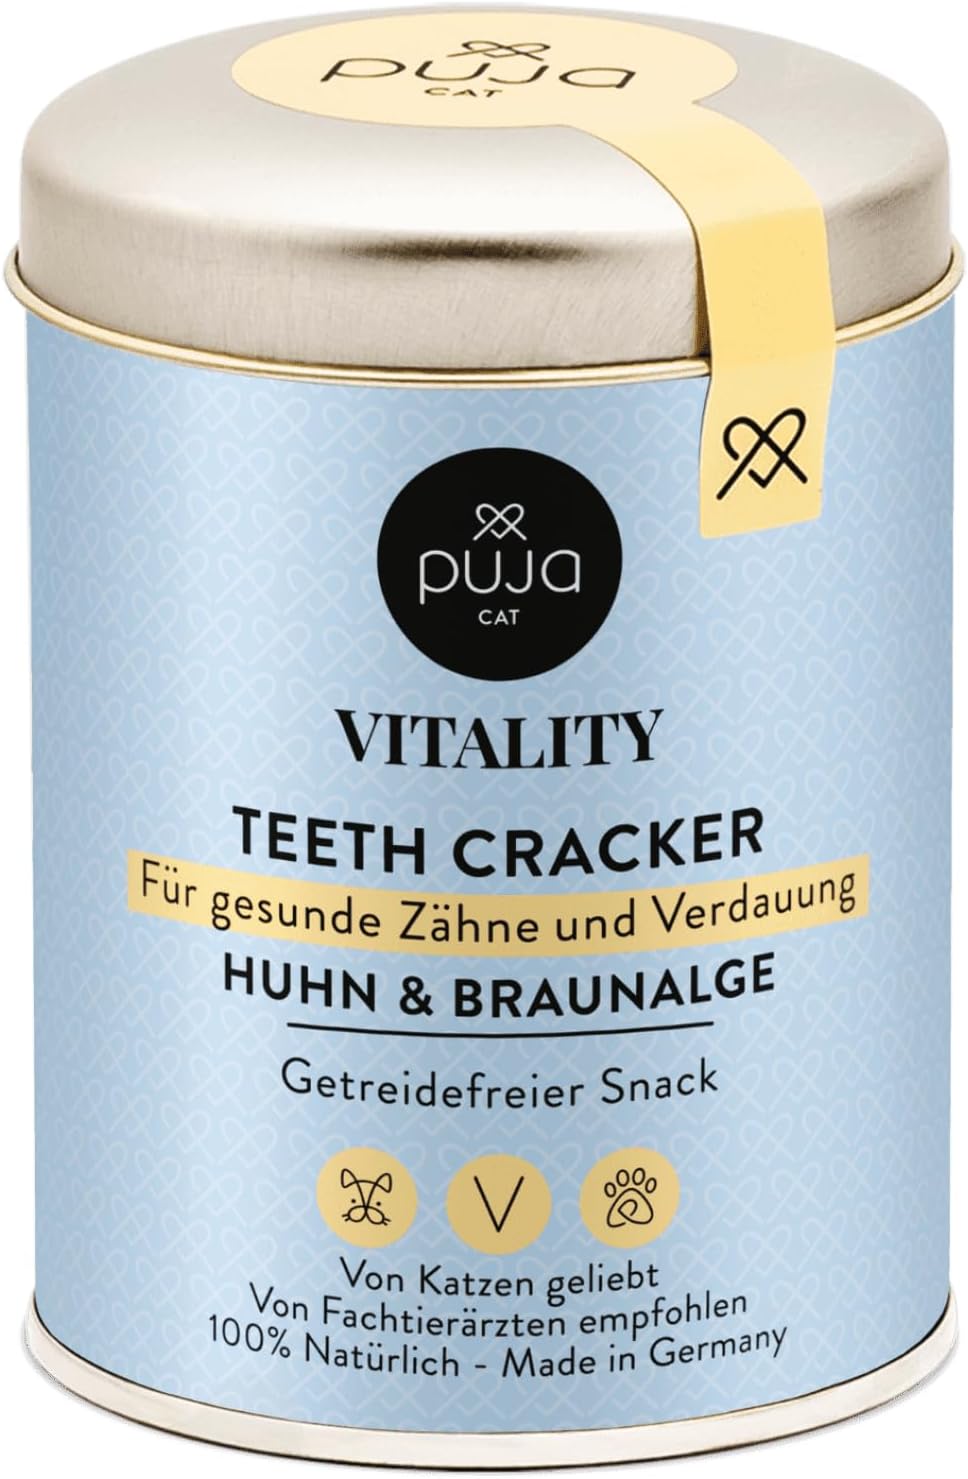 Vitality Teeth for cats - healthy teeth and digestion 150g